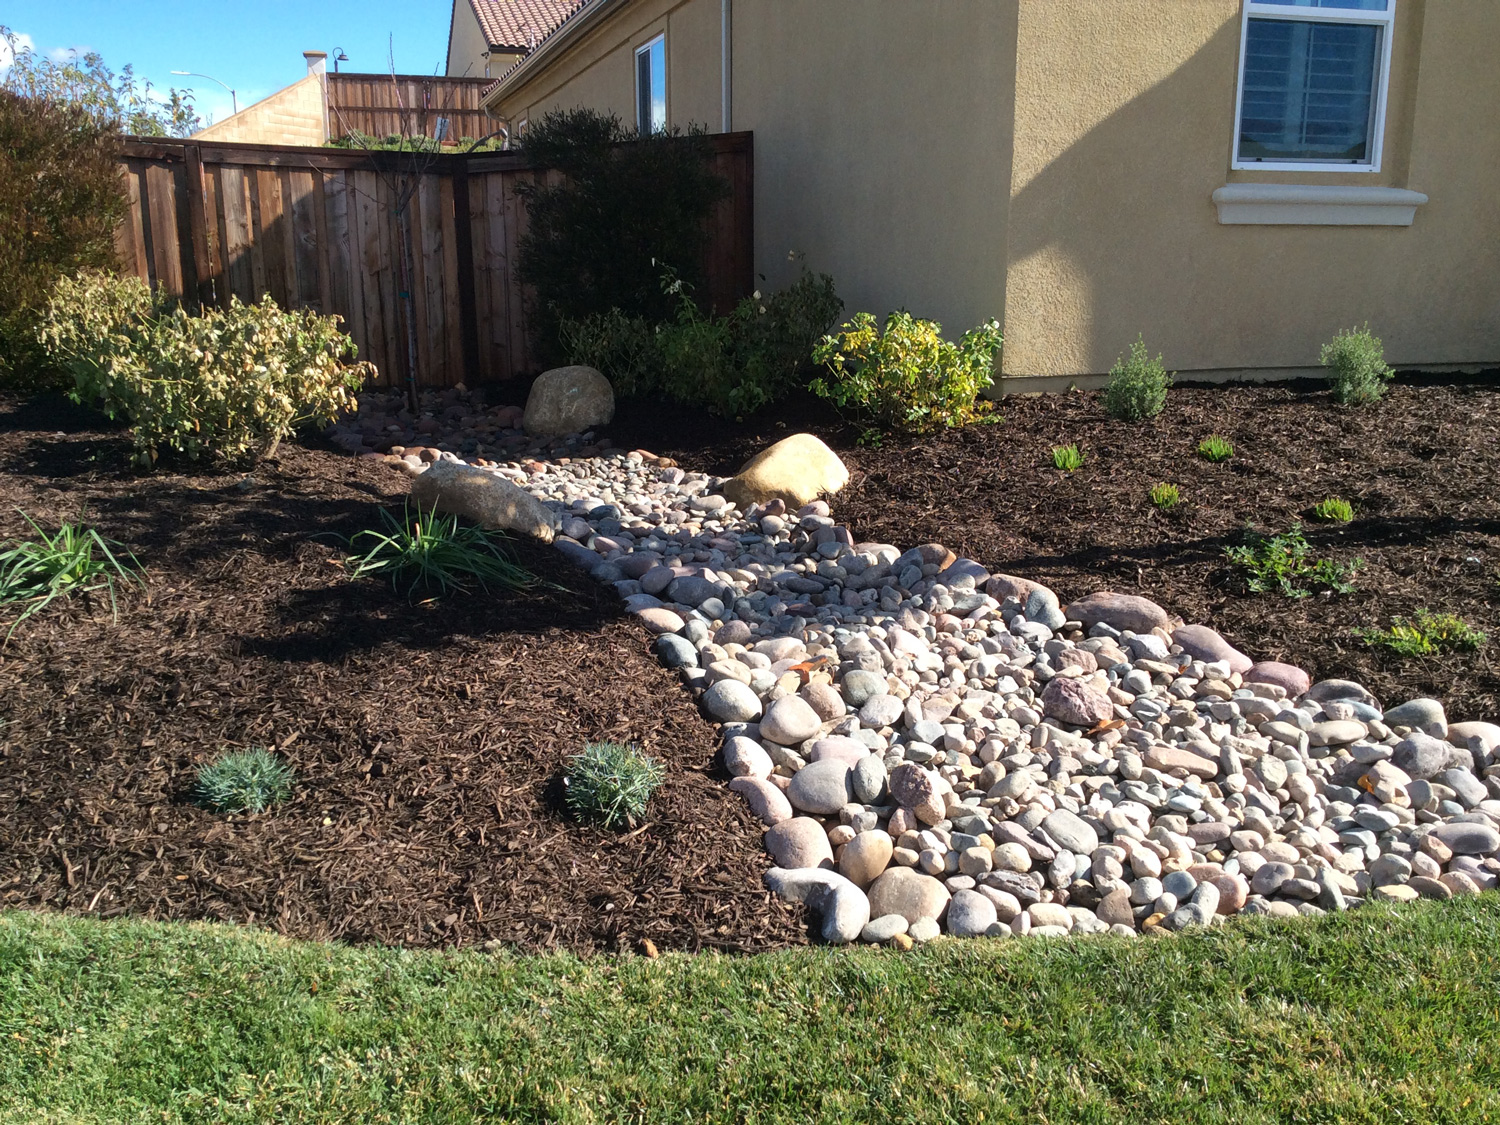 backyard landscaping with grass and mulch bed with a river rock bed in the middle.